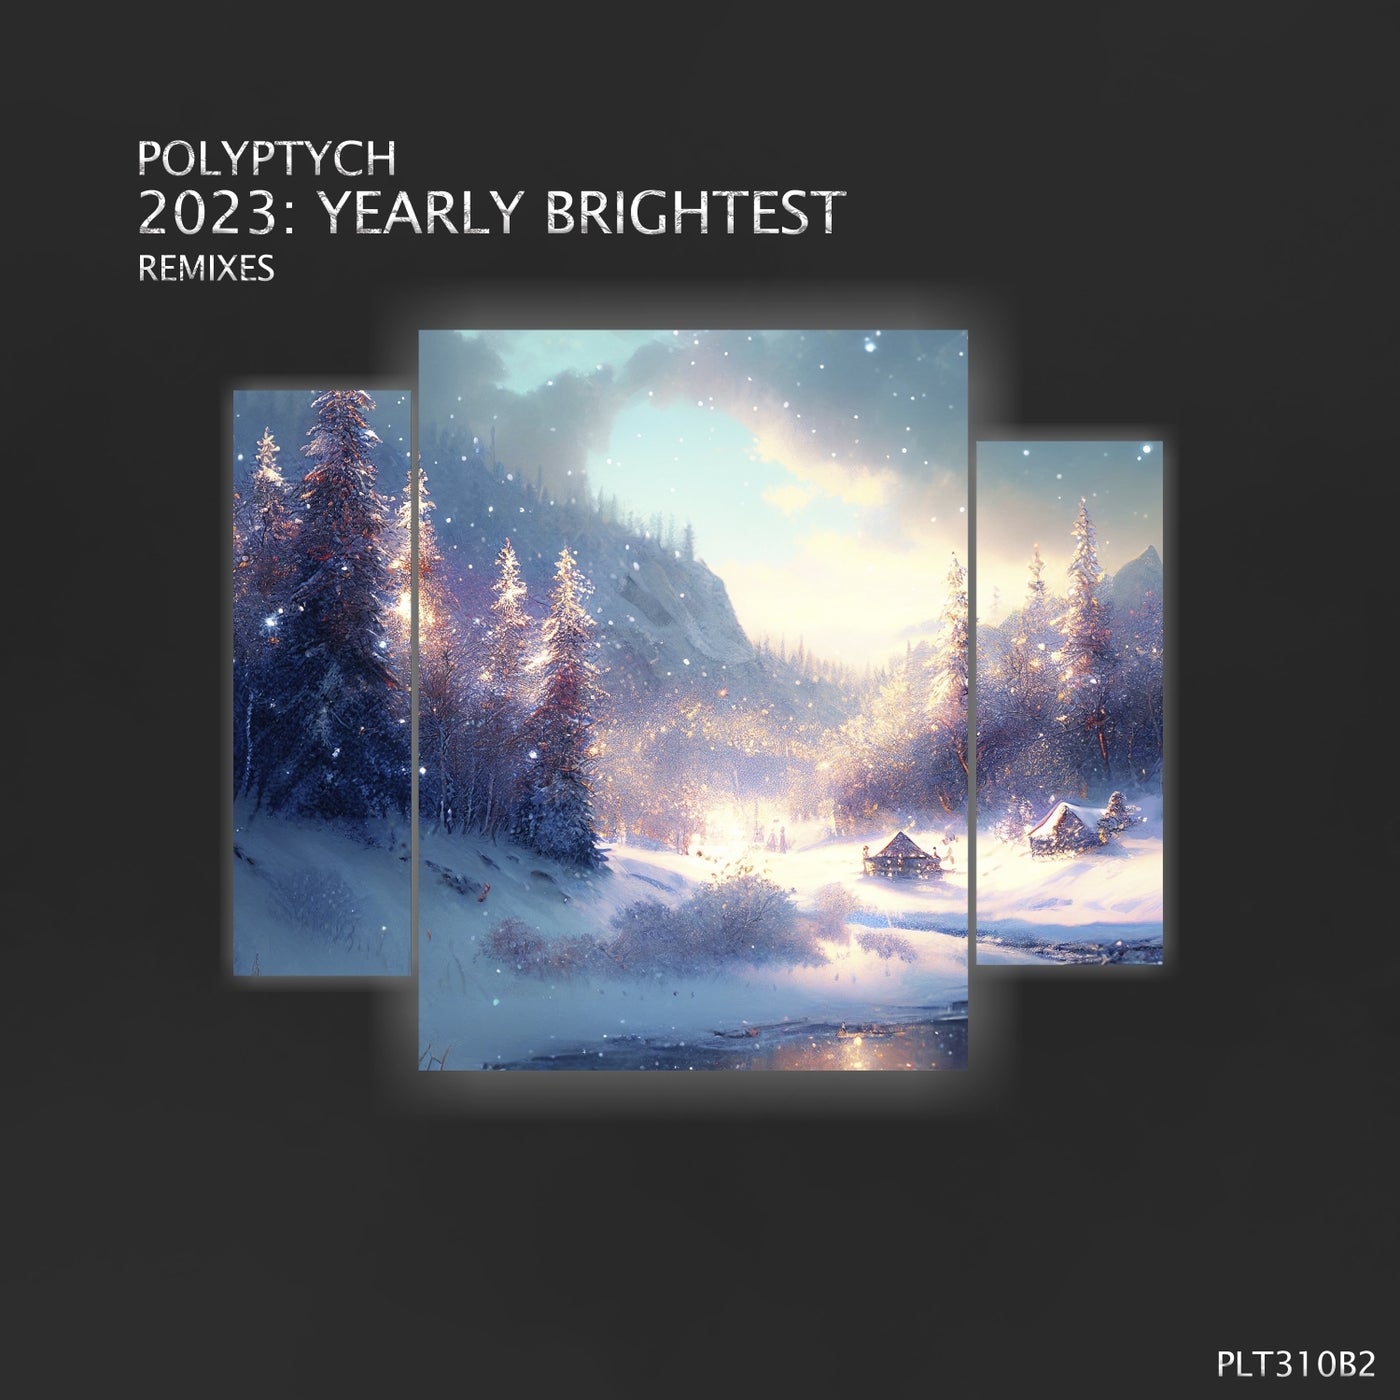 2023: Yearly Brightest / Remixes